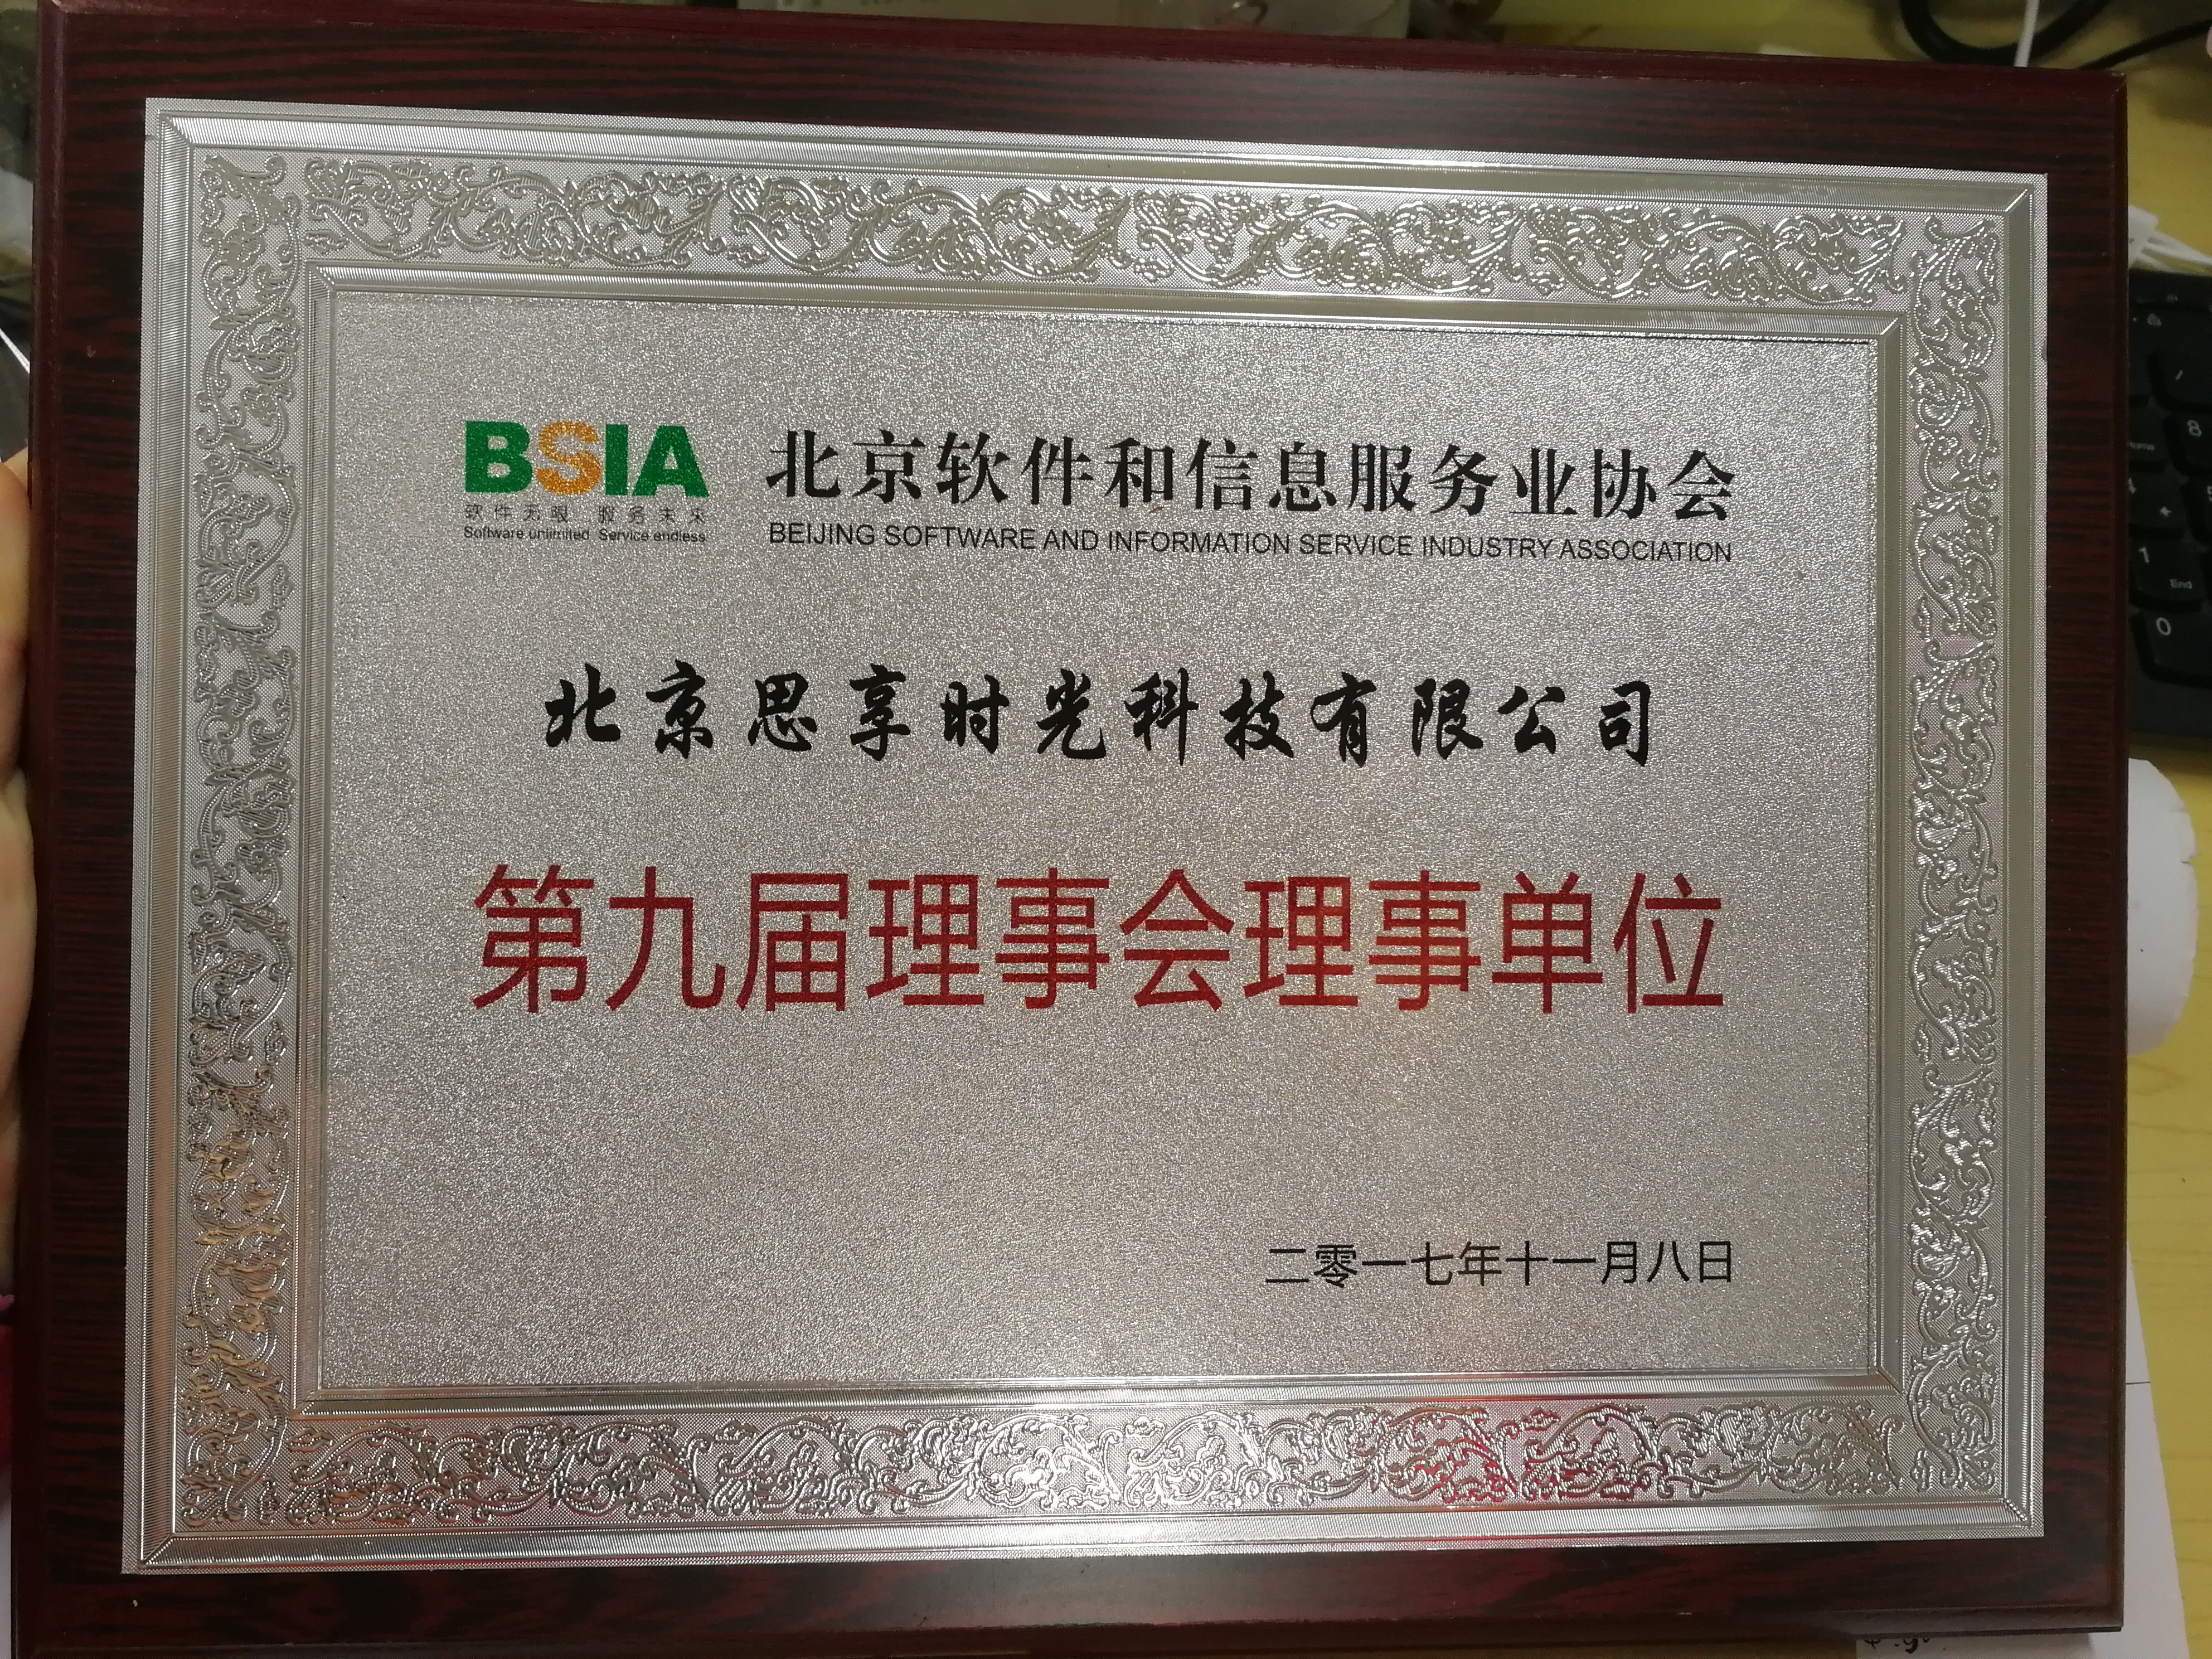                             Executive Member of Beijing Software and Information Service Association
                        